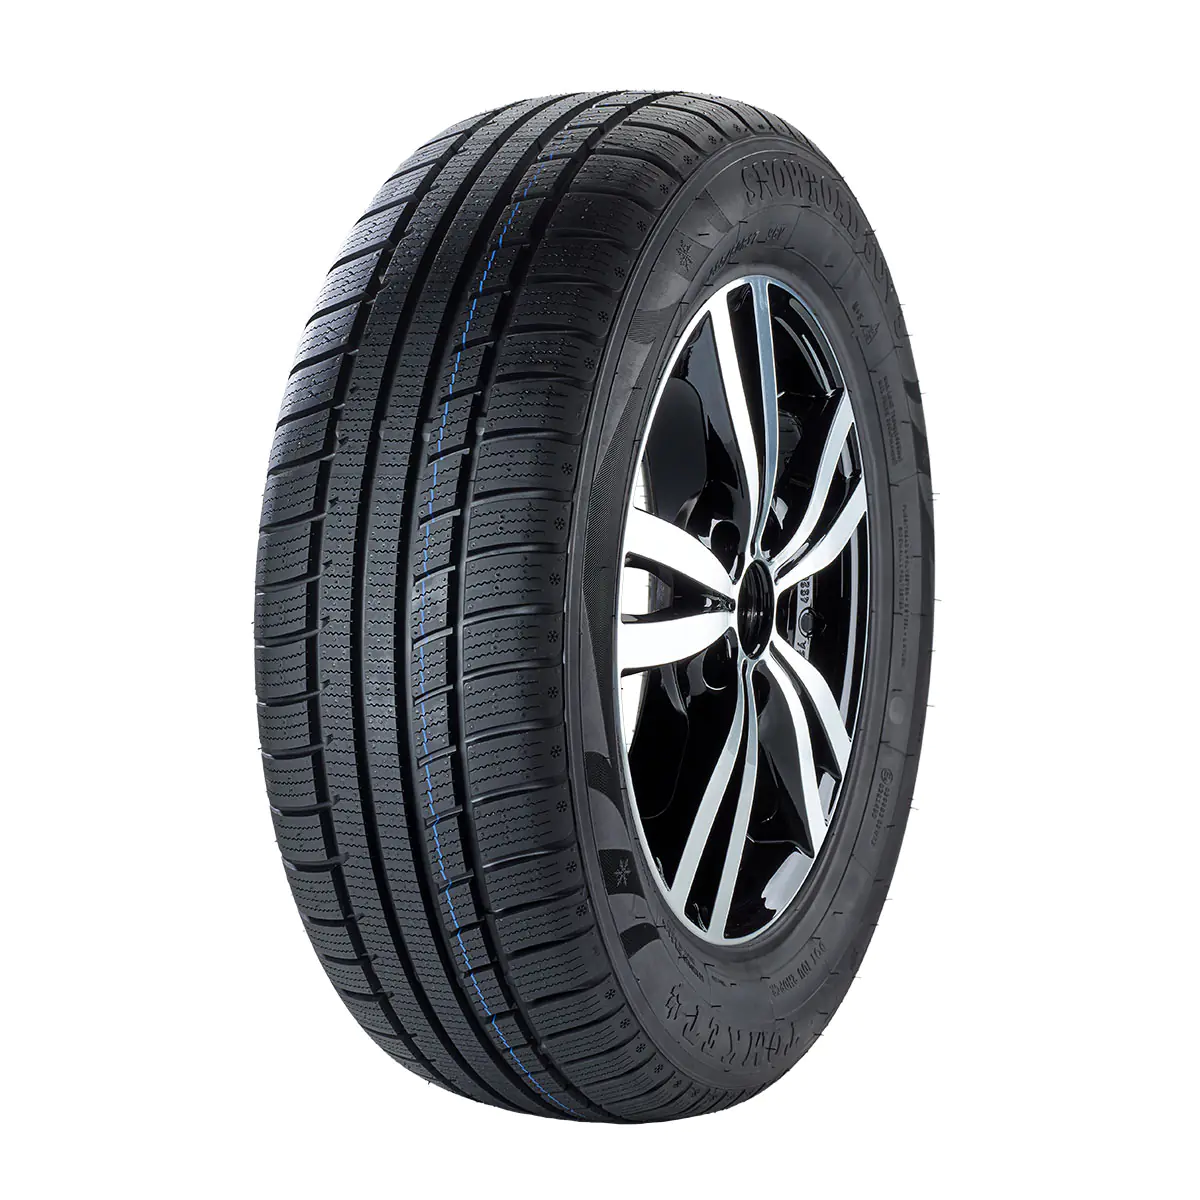 Gomme 4x4 Suv Tomket 255/55 R18 109V SNOWROAD SUV 3 XL M+S Invernale